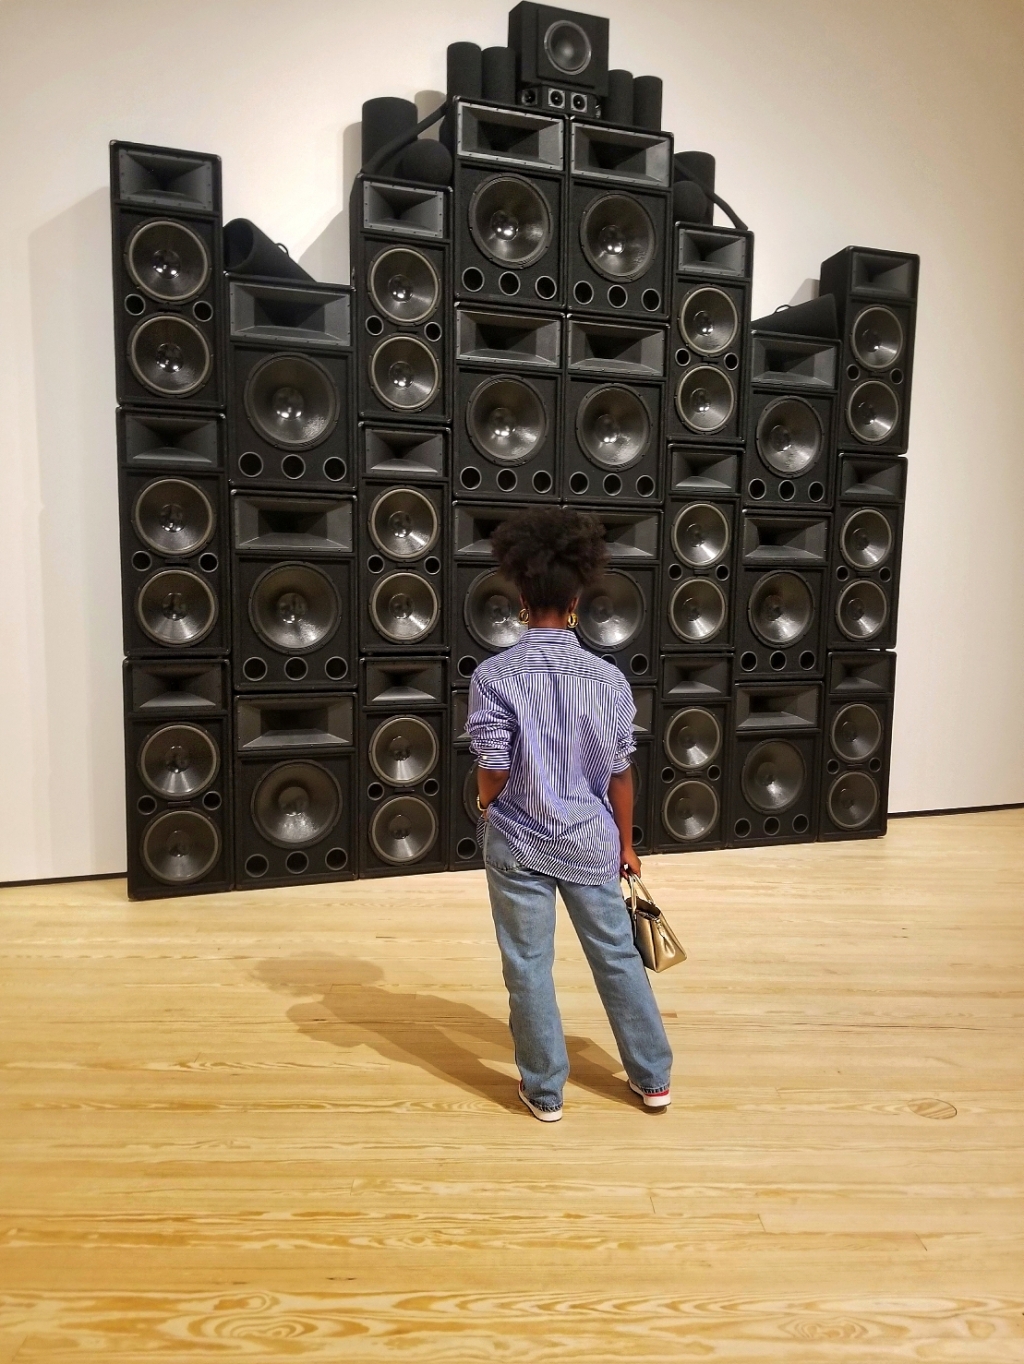 Esmesha’s Life: Celebrating Hip-Hop Culture at The Dirty South Exhibition at Contemporary Arts Museum Houston